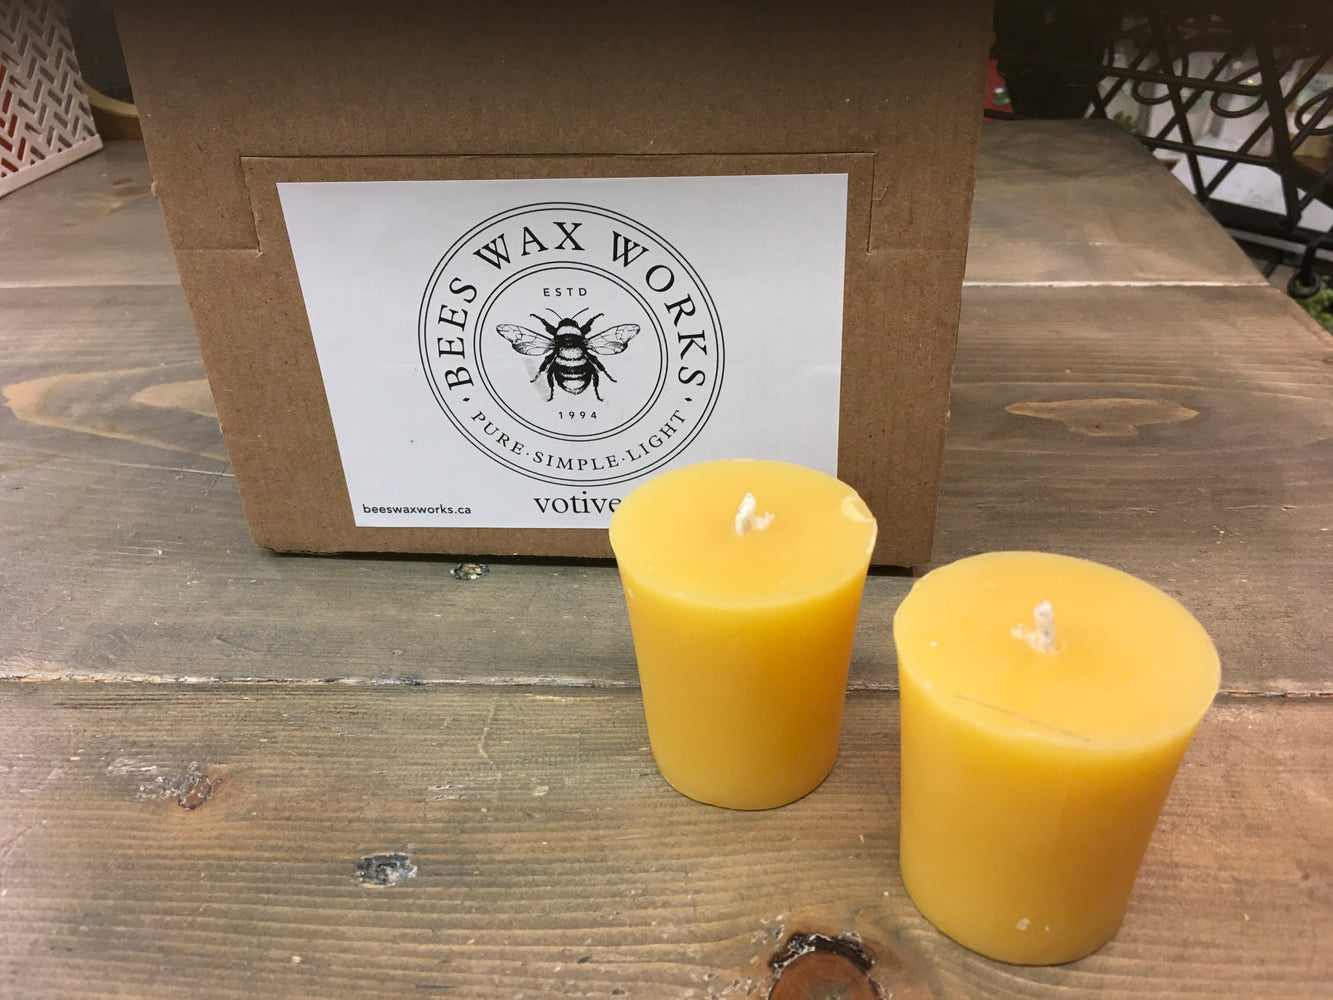 Votive Bees Wax candle